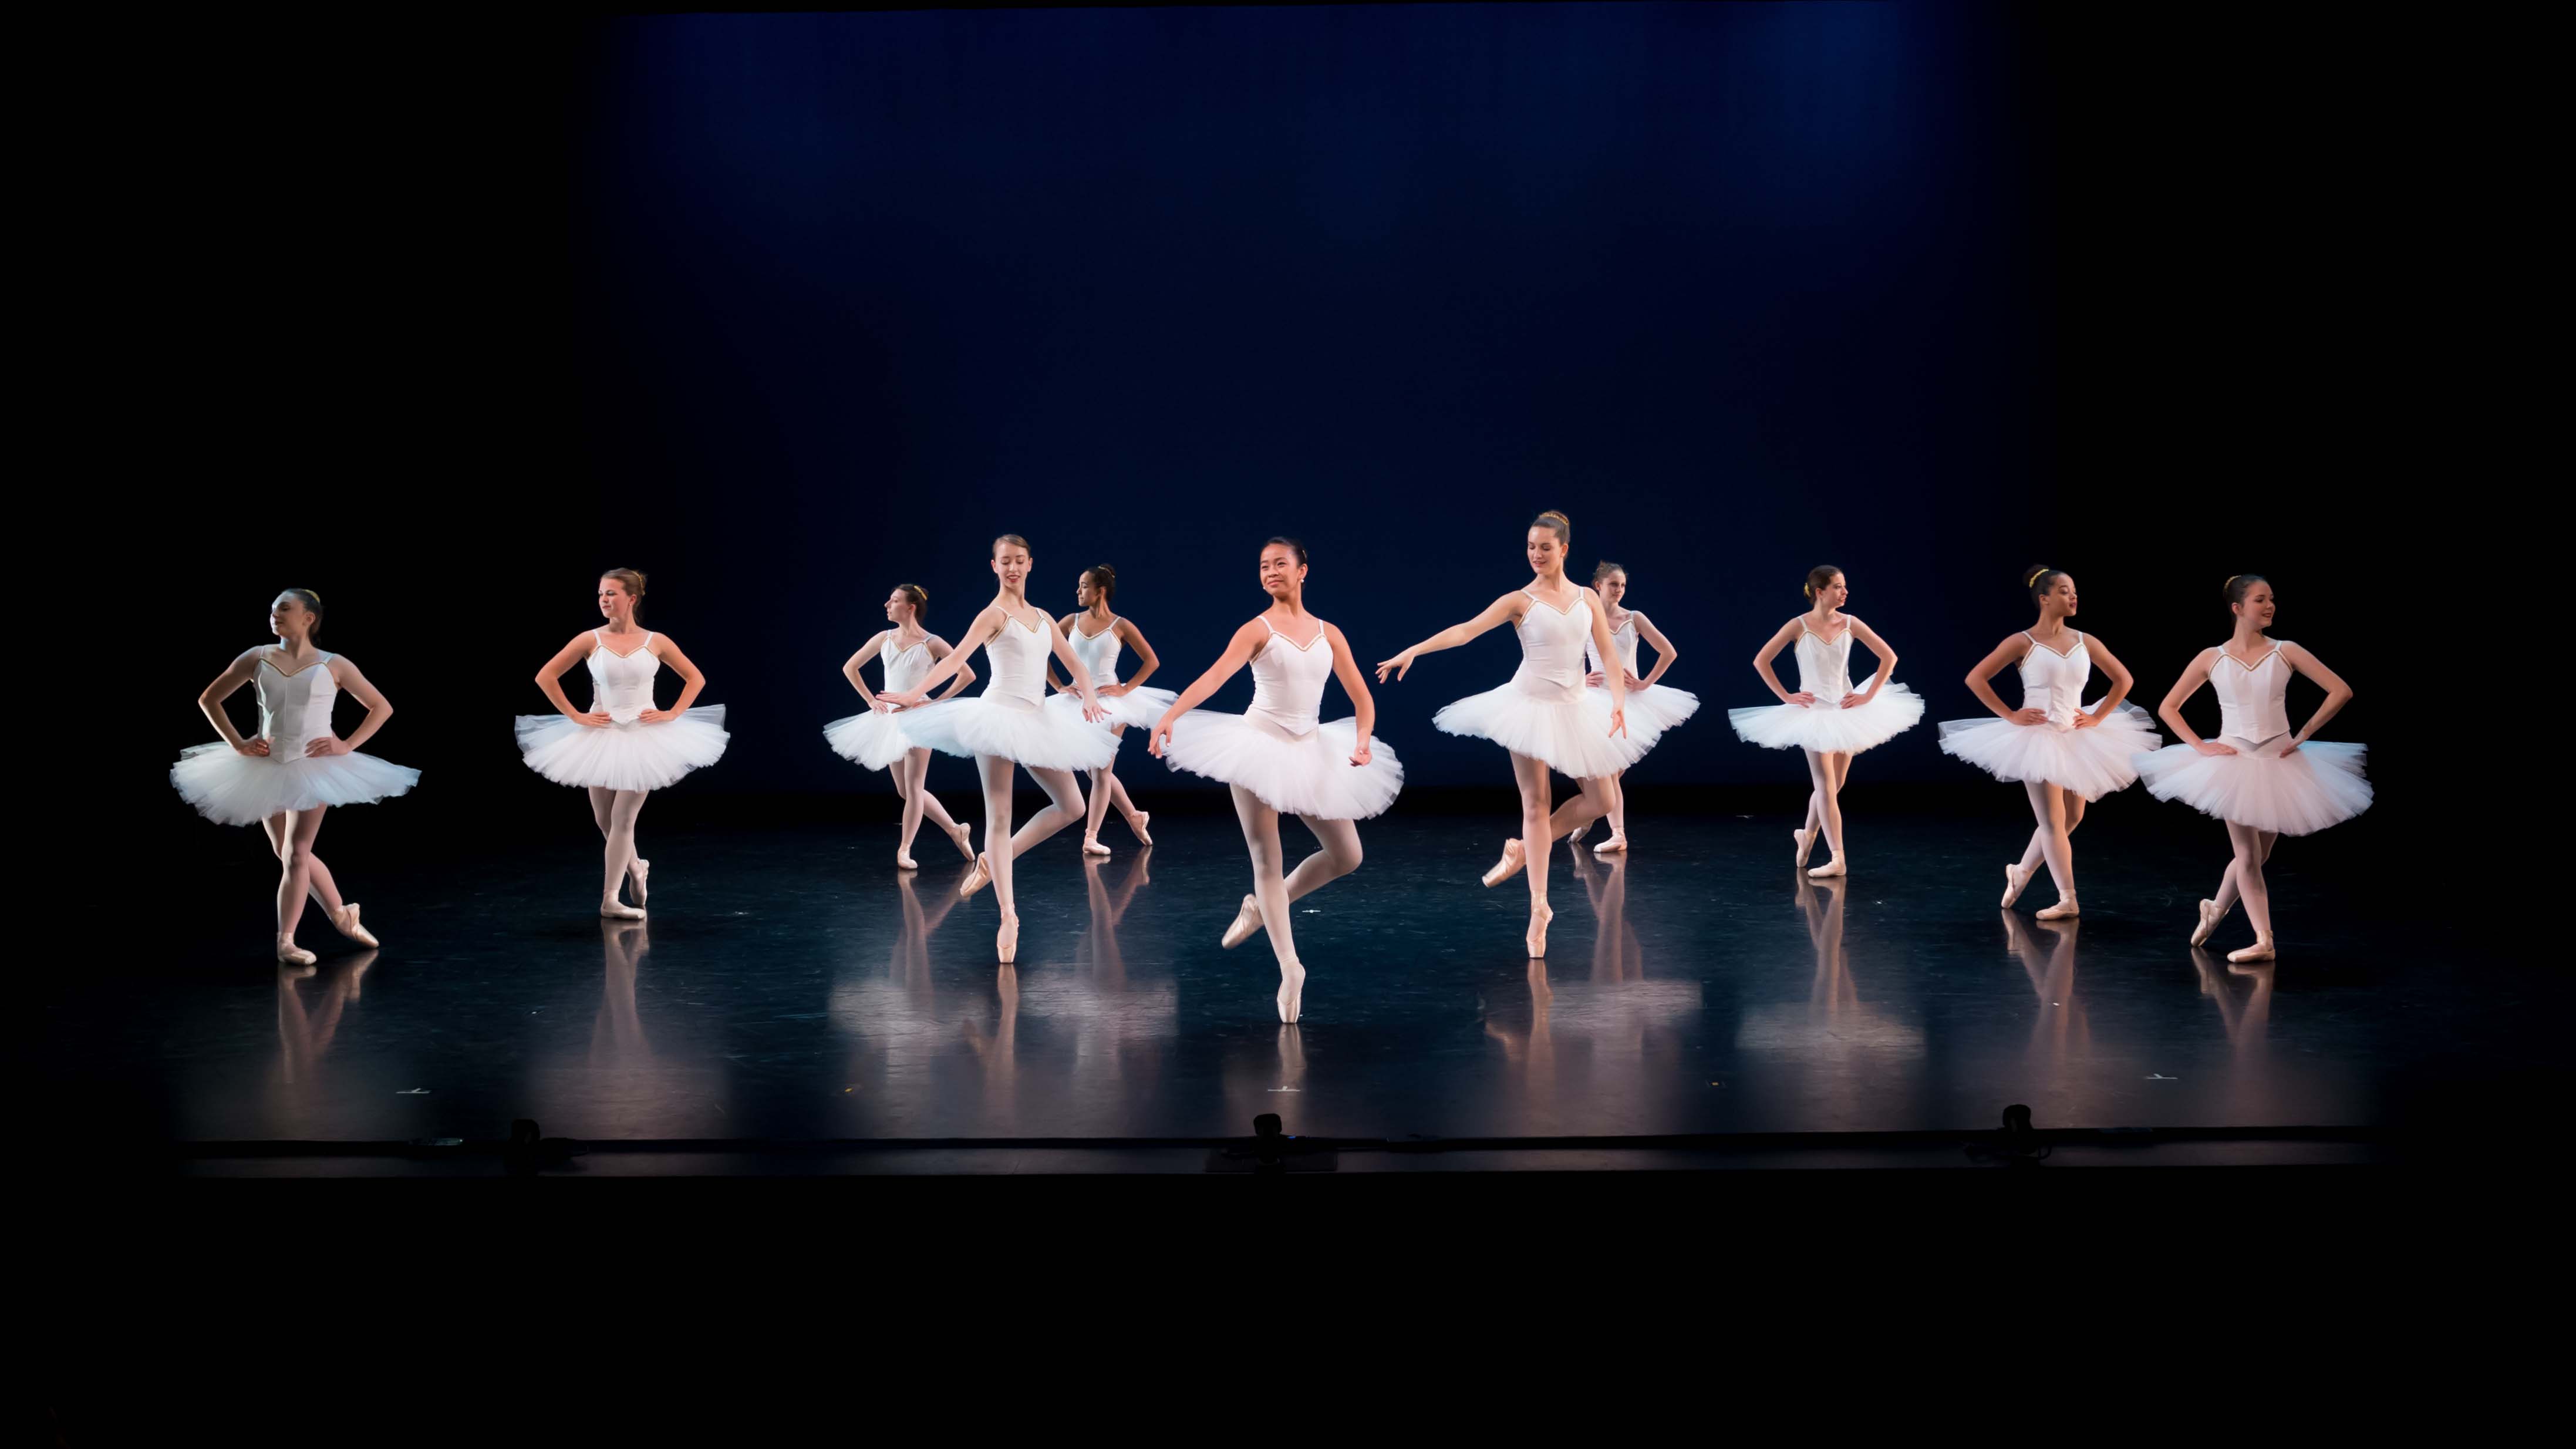 A group of dancers wearing white ballet dresses perform in synchrony on a darkened stage. Photo by Mitchell Davis ’19.